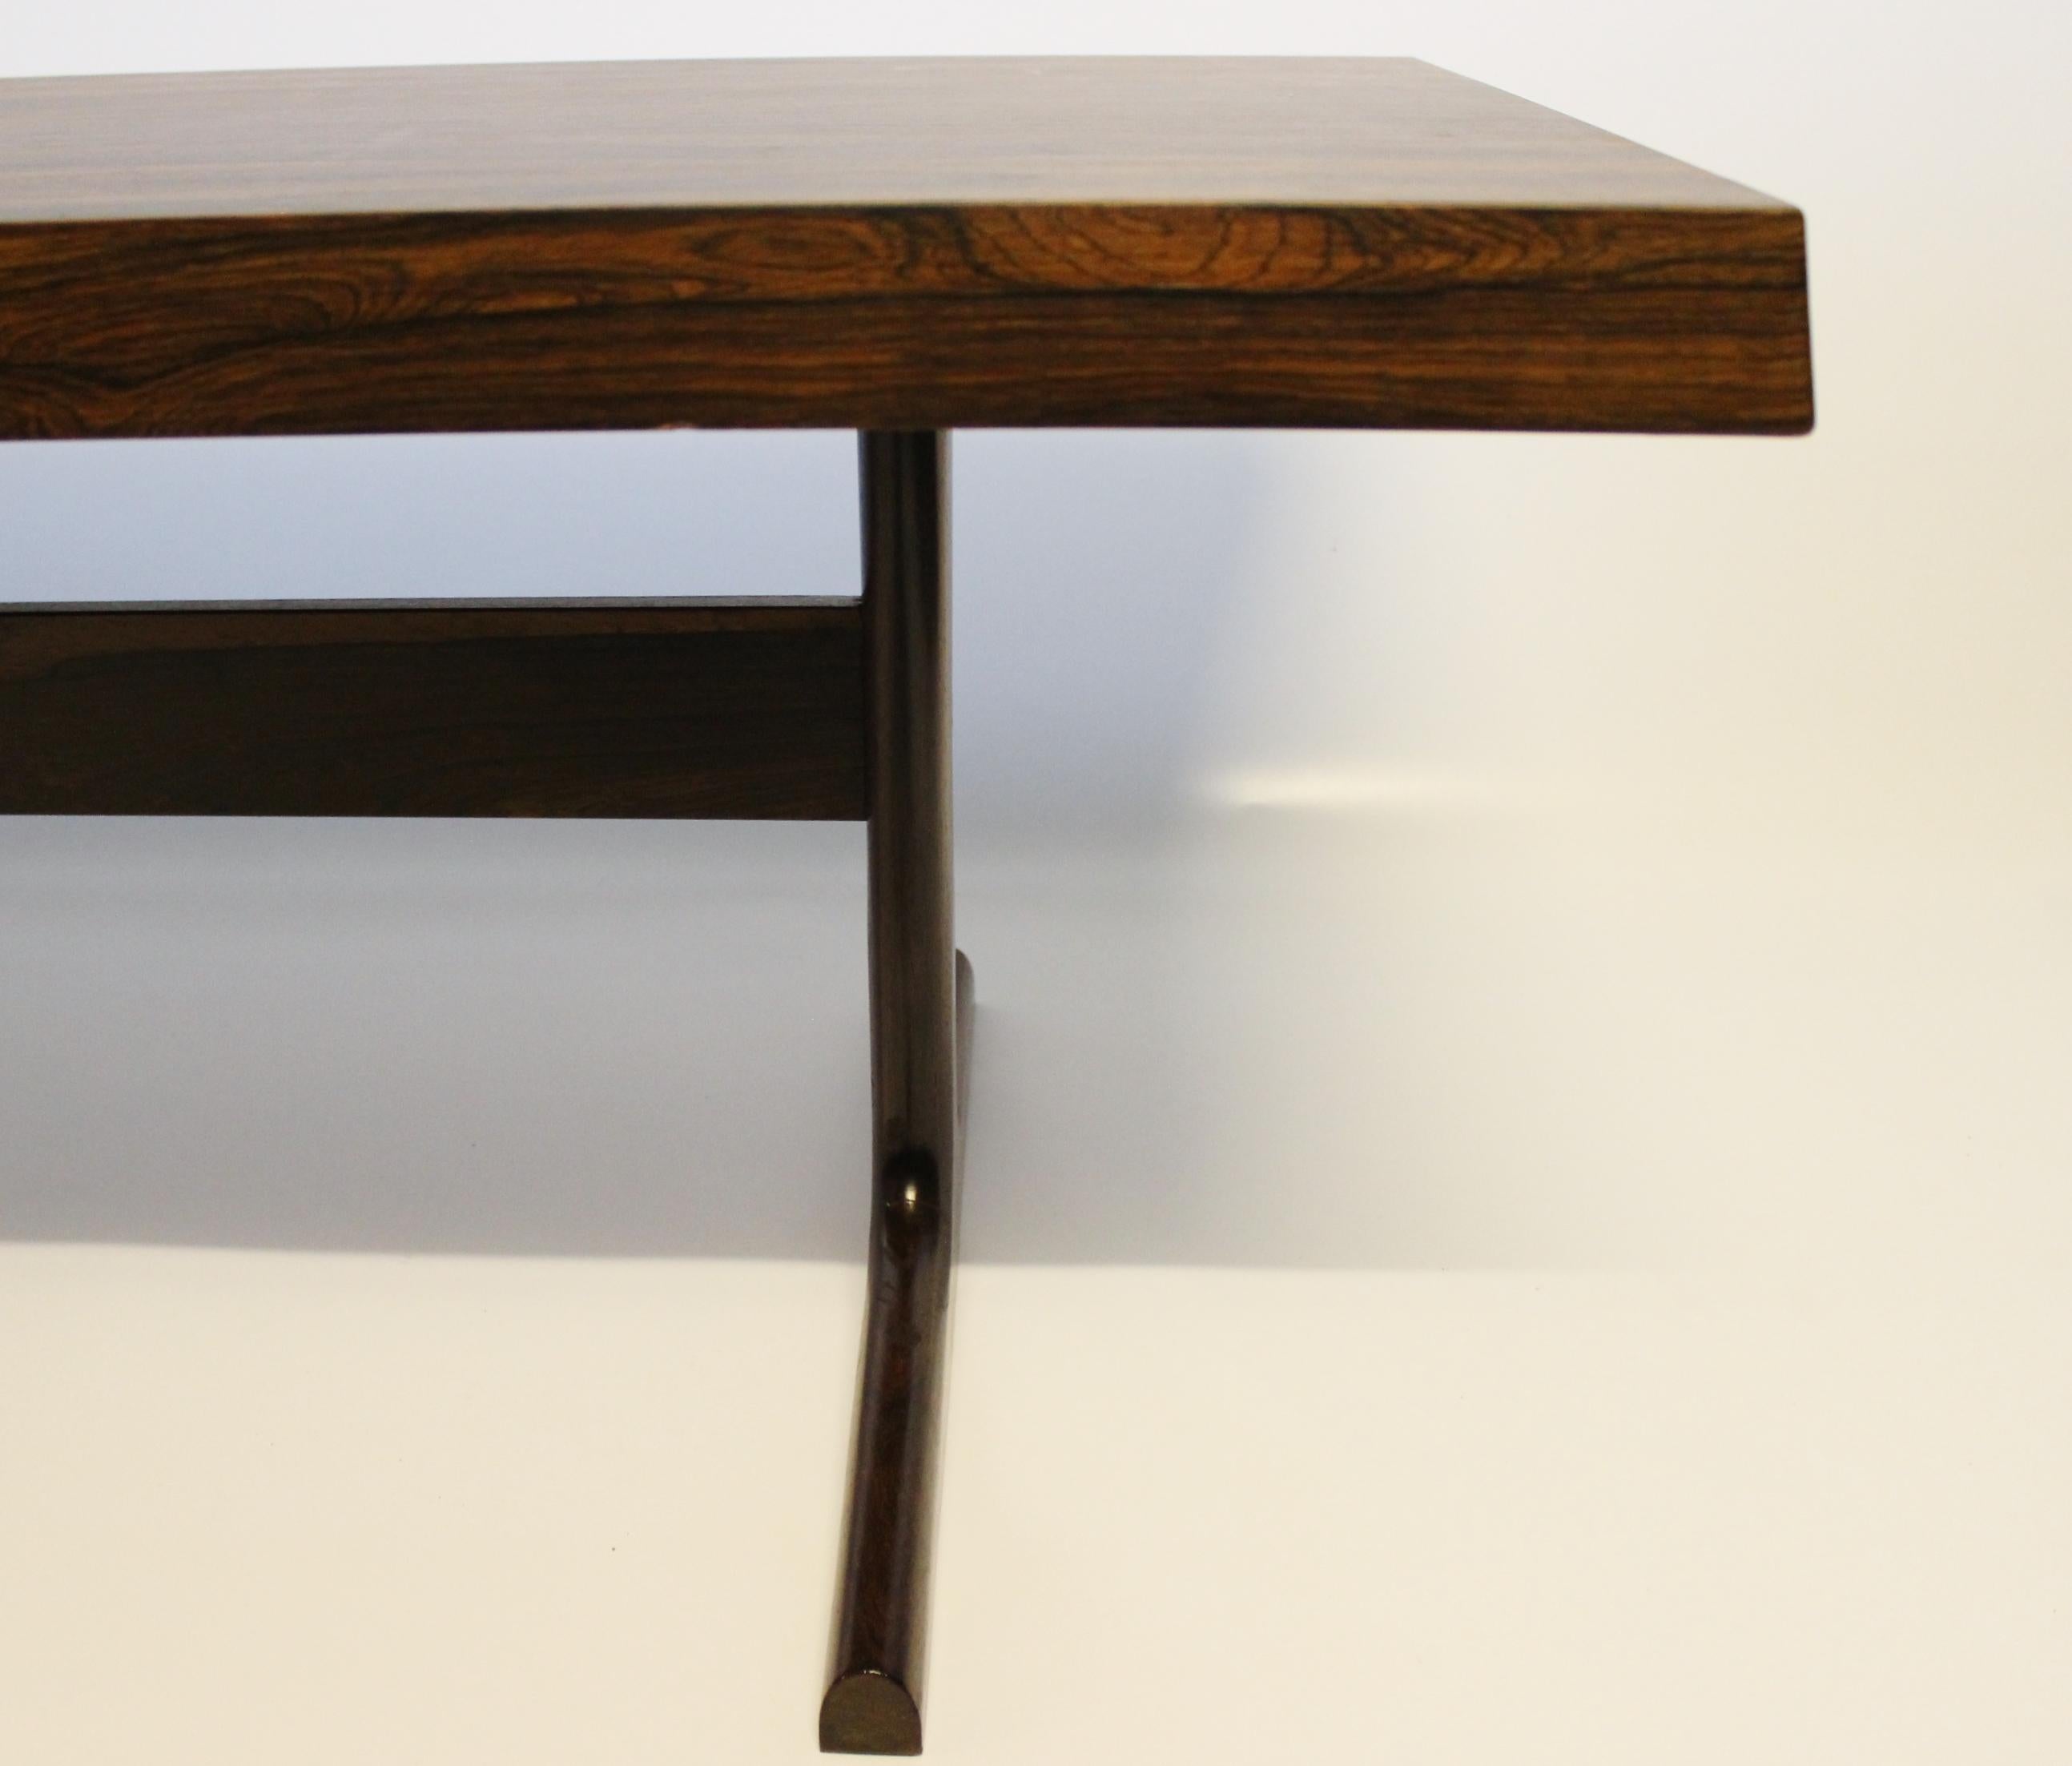 Mid-20th Century Coffee Table Made In Rosewood, Danish Design From 1960s